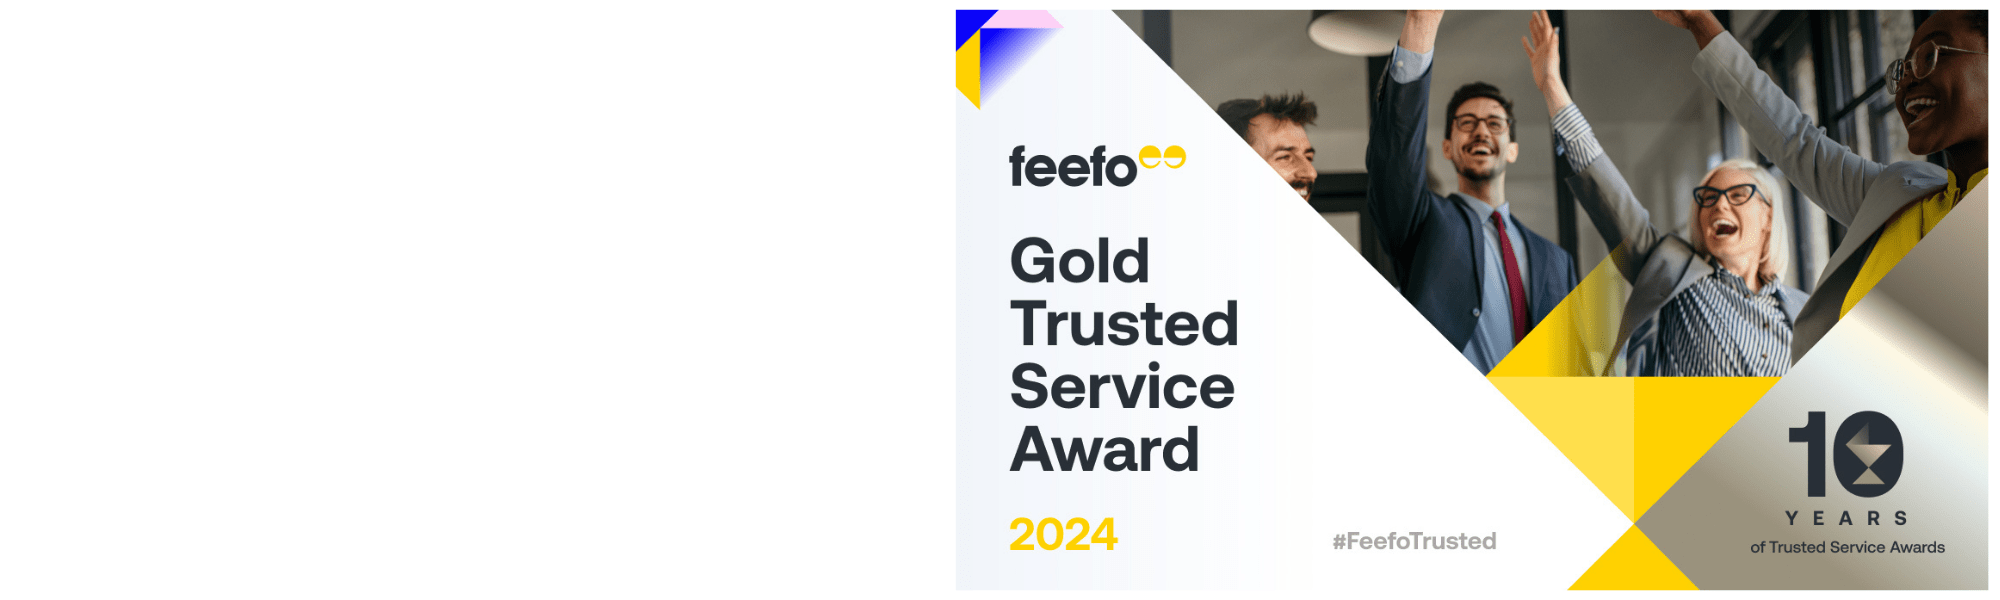 Core Talent have won the Feefo Gold Trusted Service Award